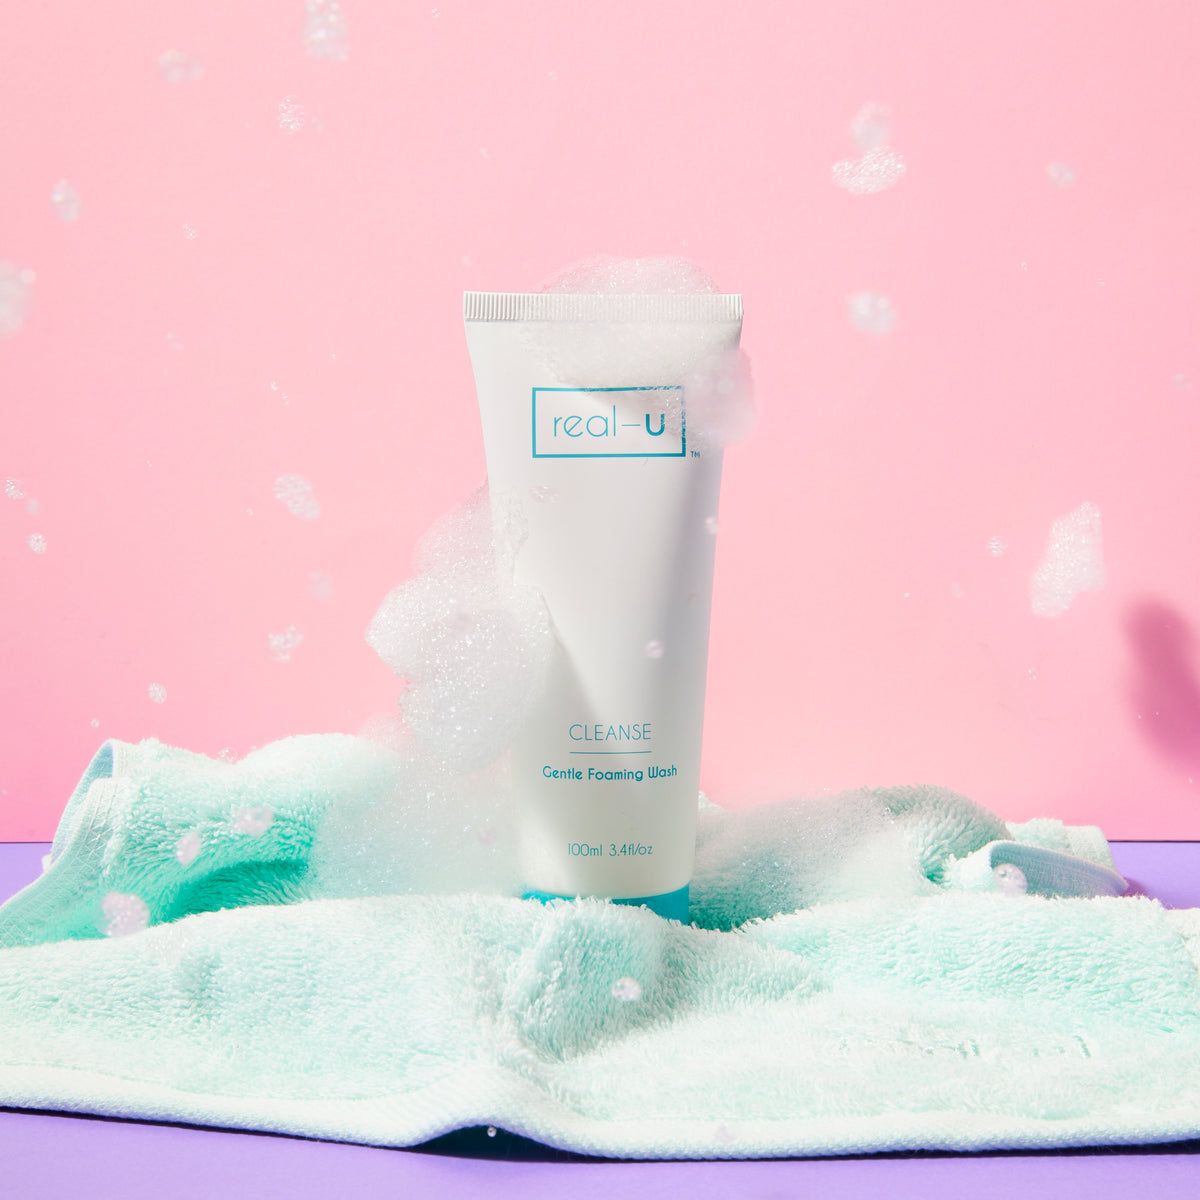 real-u face cloth and CLEANSE Gentle Foaming Wash - a perfect combination for clearing acne